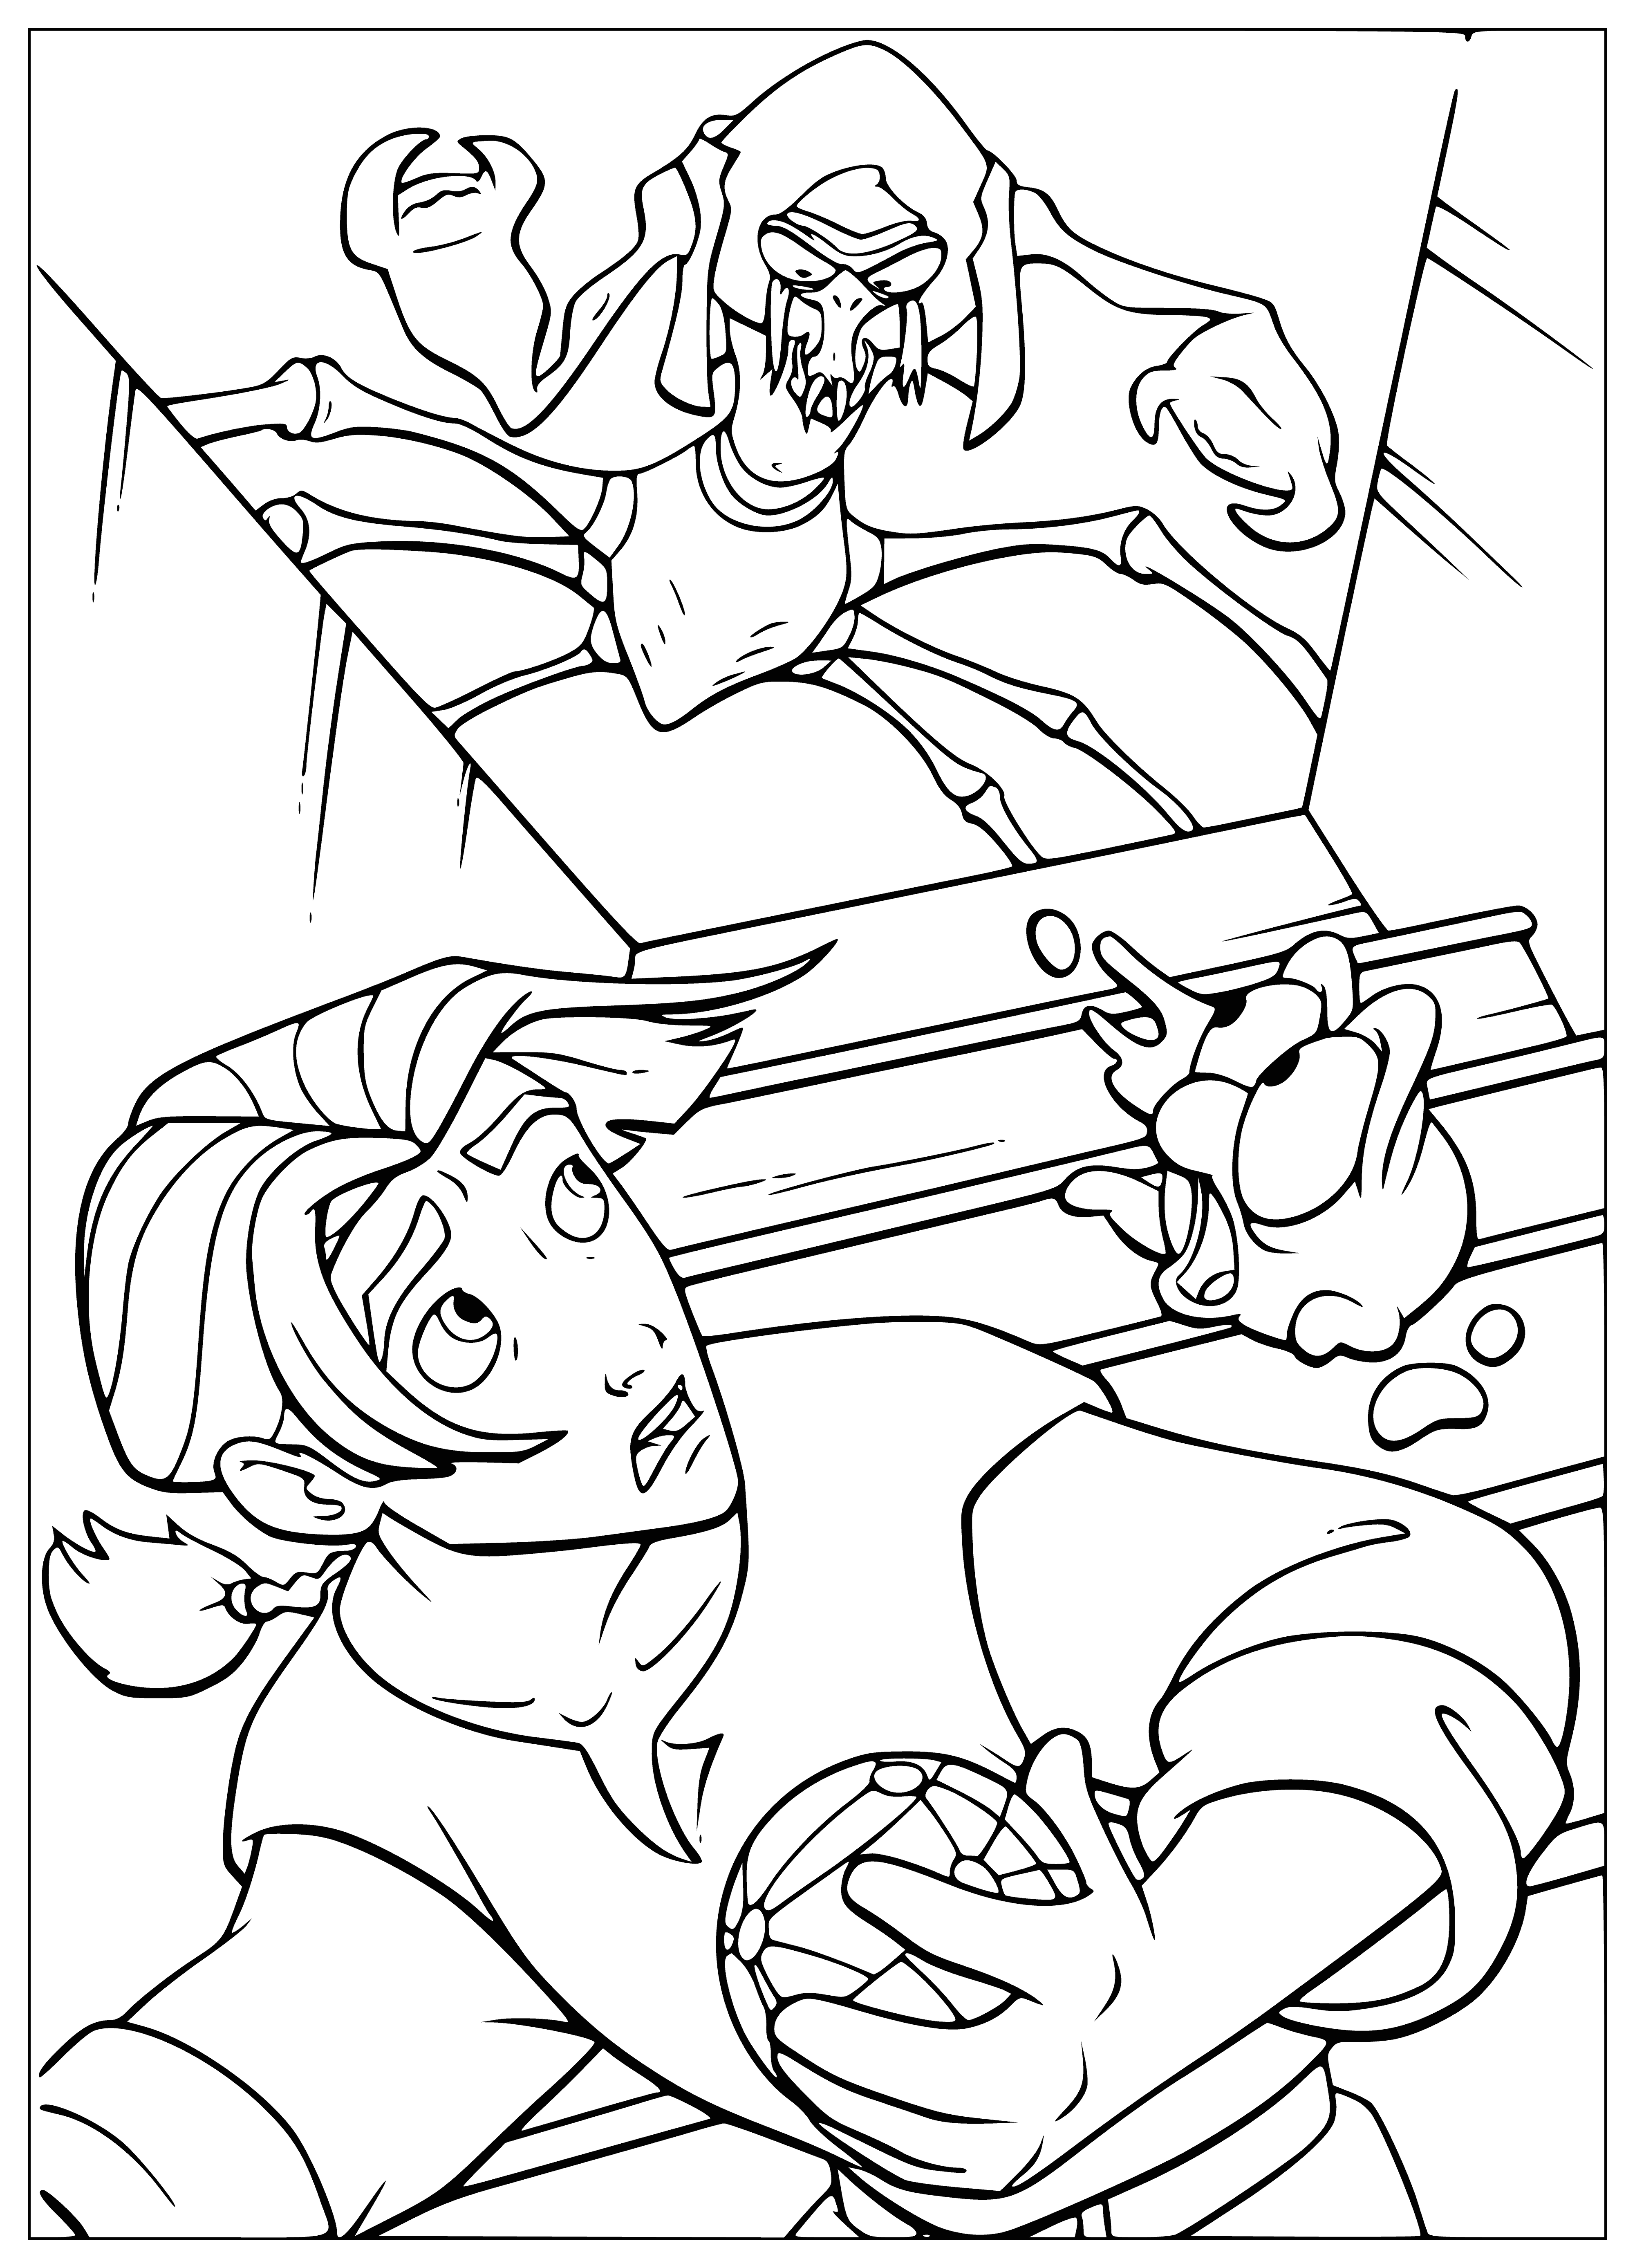 coloring page: Boy chases map at sea; he runs after it as it drifts in the wind.